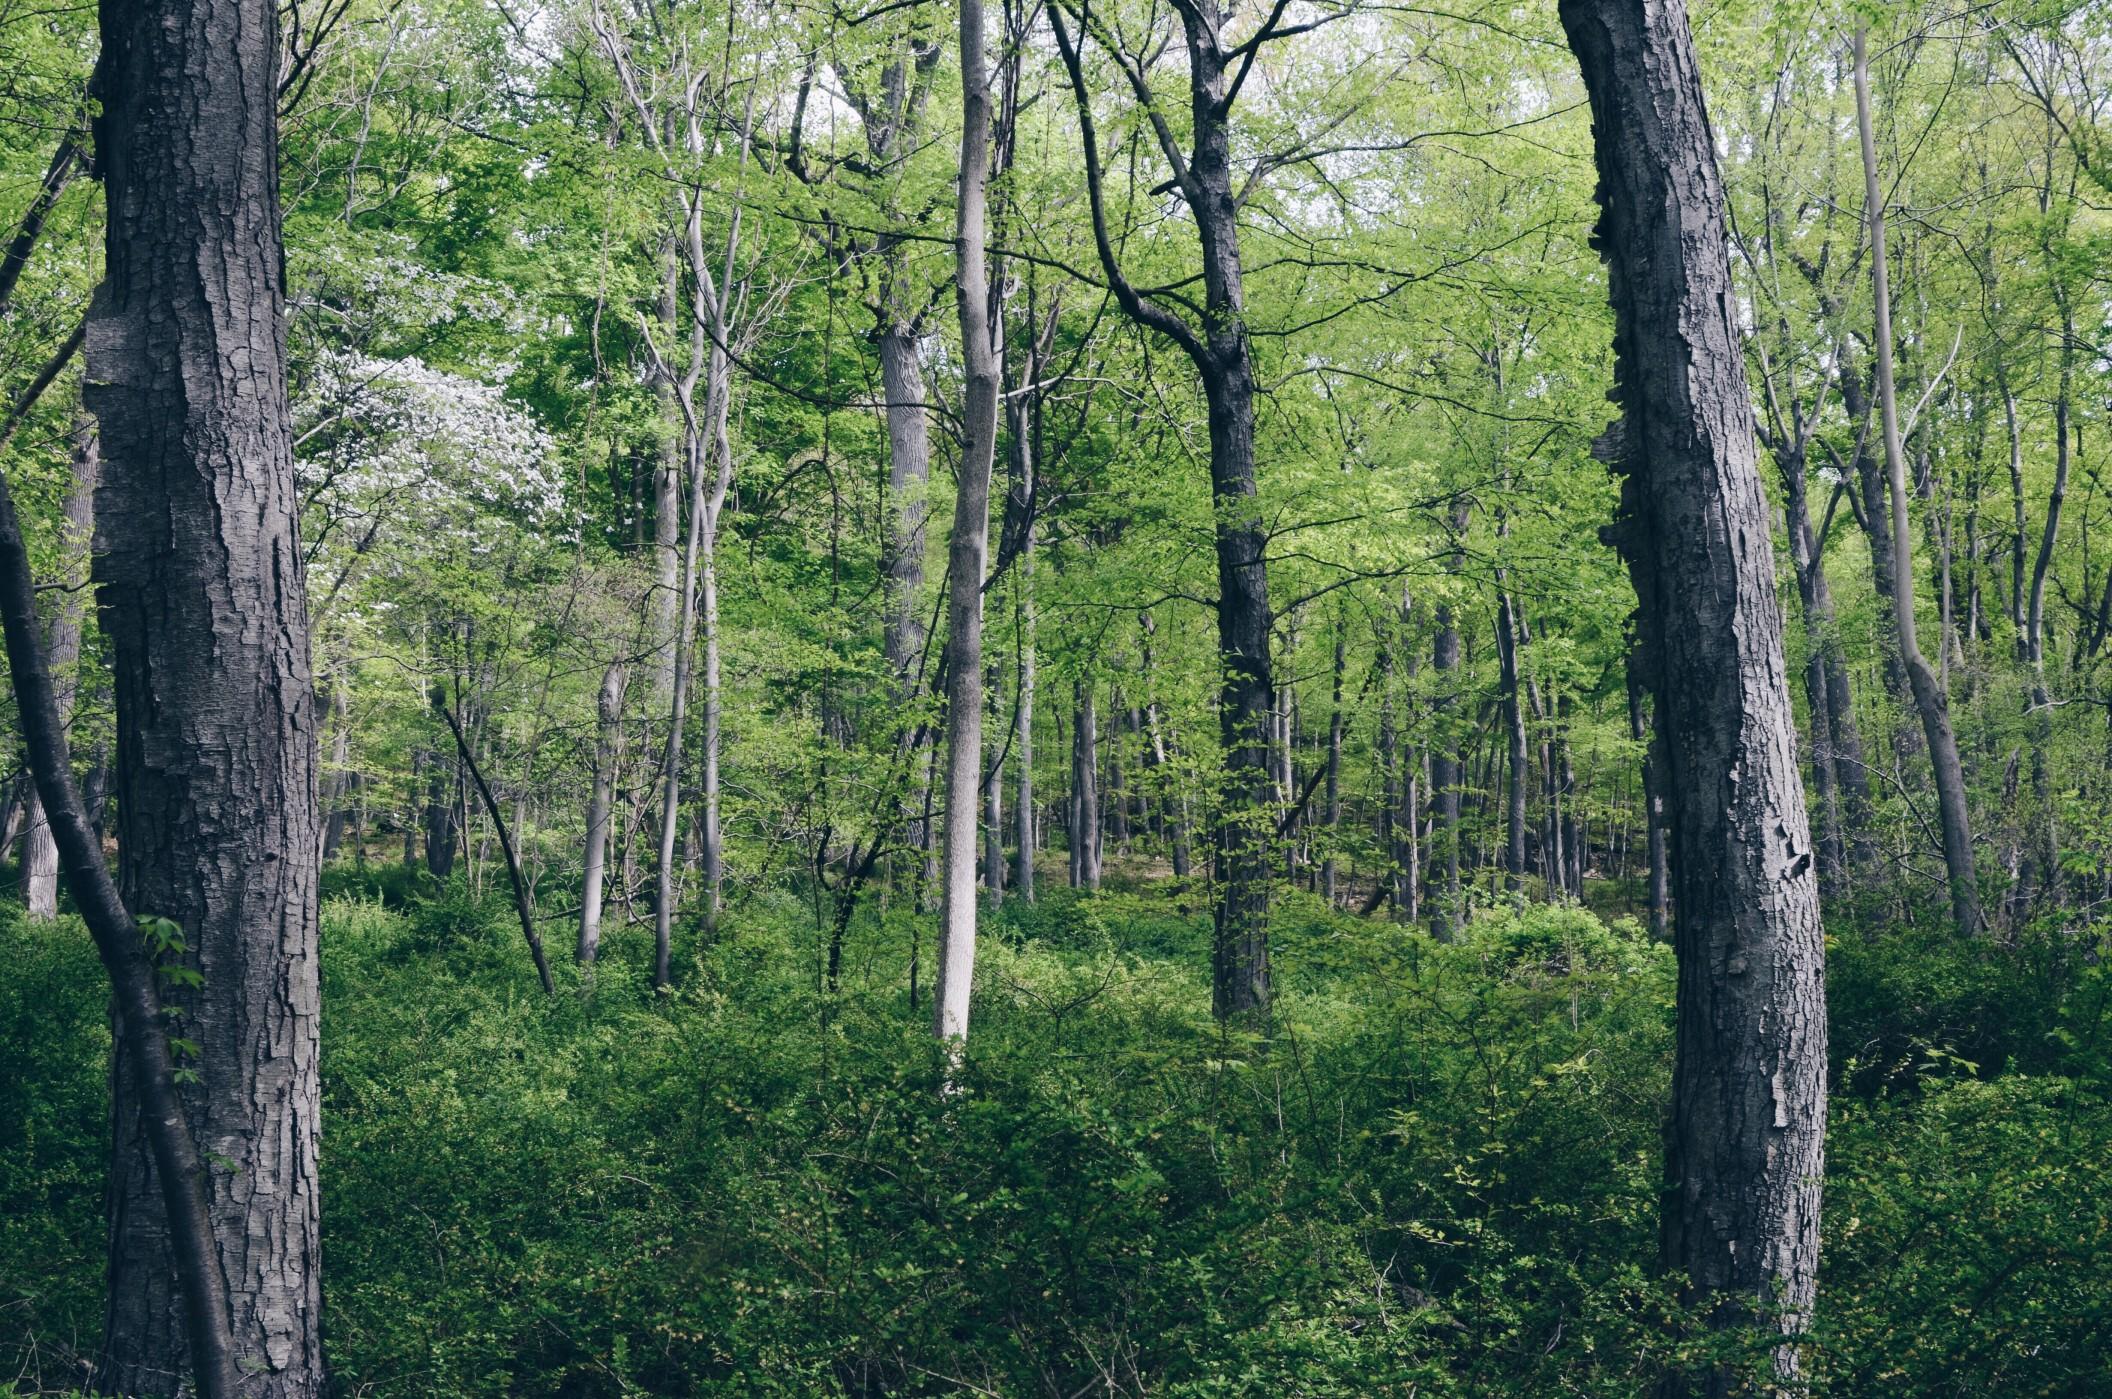 View of a forest in New Jersey, lush green shrubbery and tall trees. 